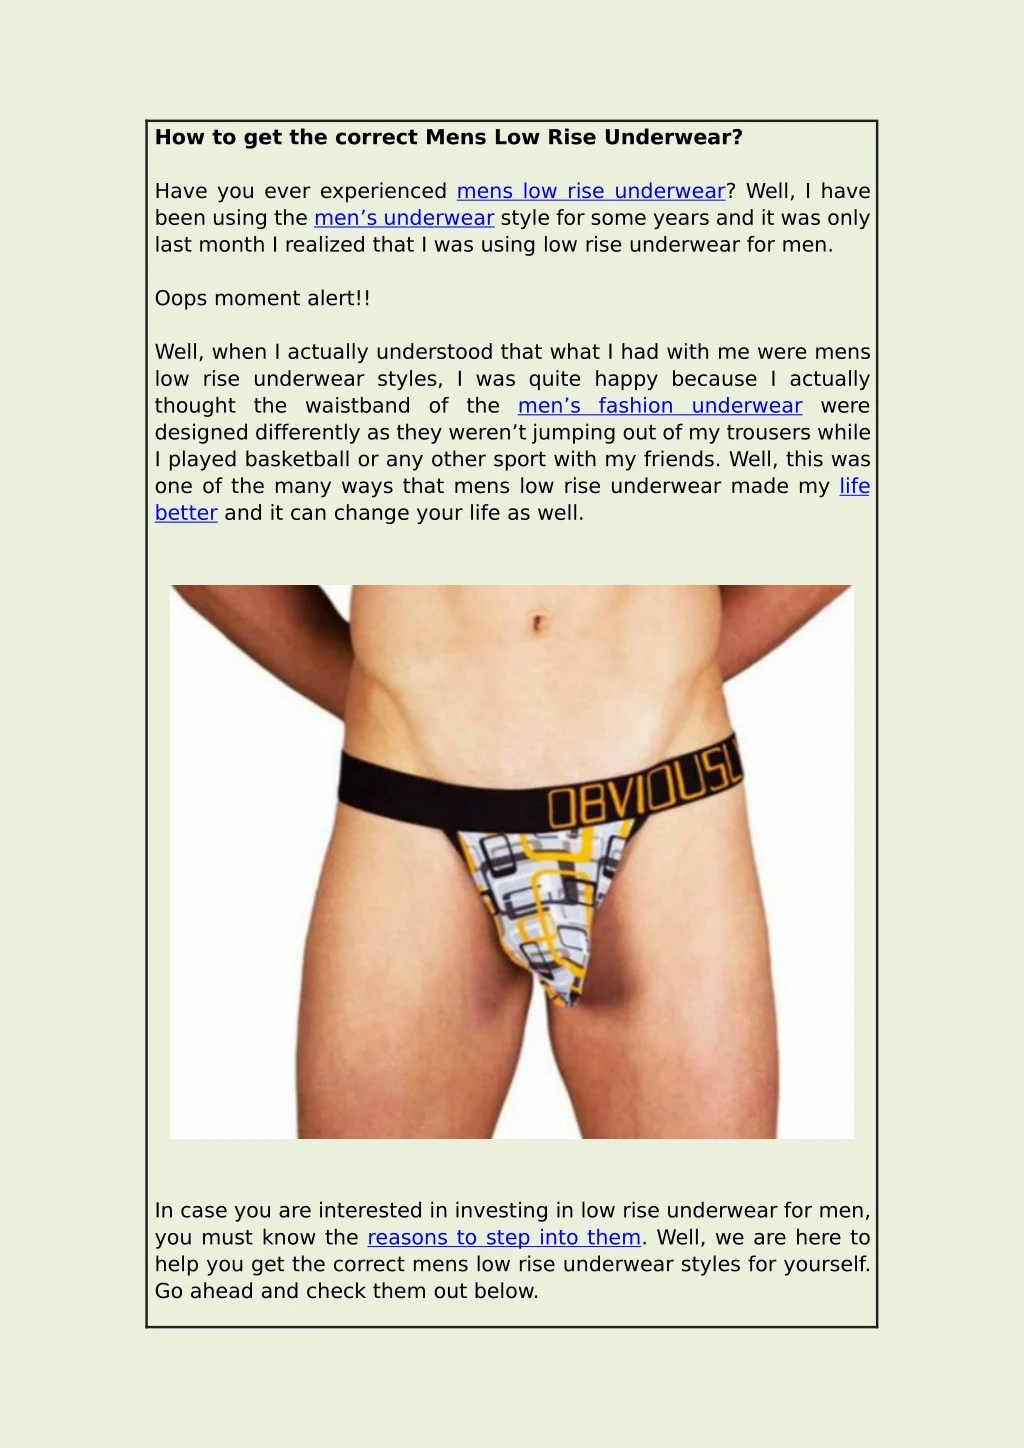 how to get the correct mens low rise underwear